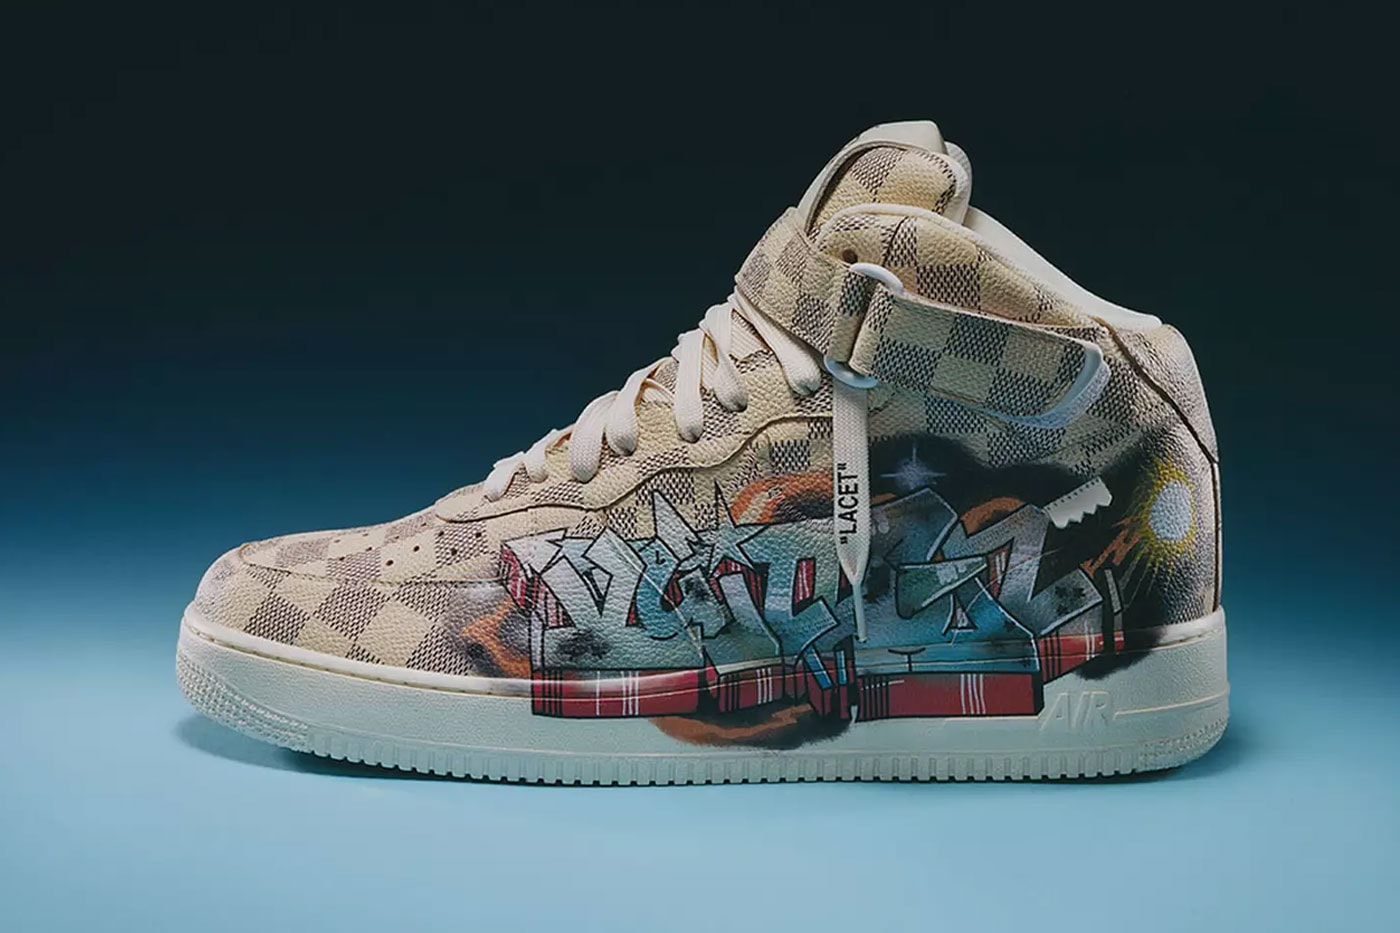 Louis Vuitton Opens an Exhibit for Virgil Abloh's Nike Air Force 1 Collaboration nike af1 new york city nyc